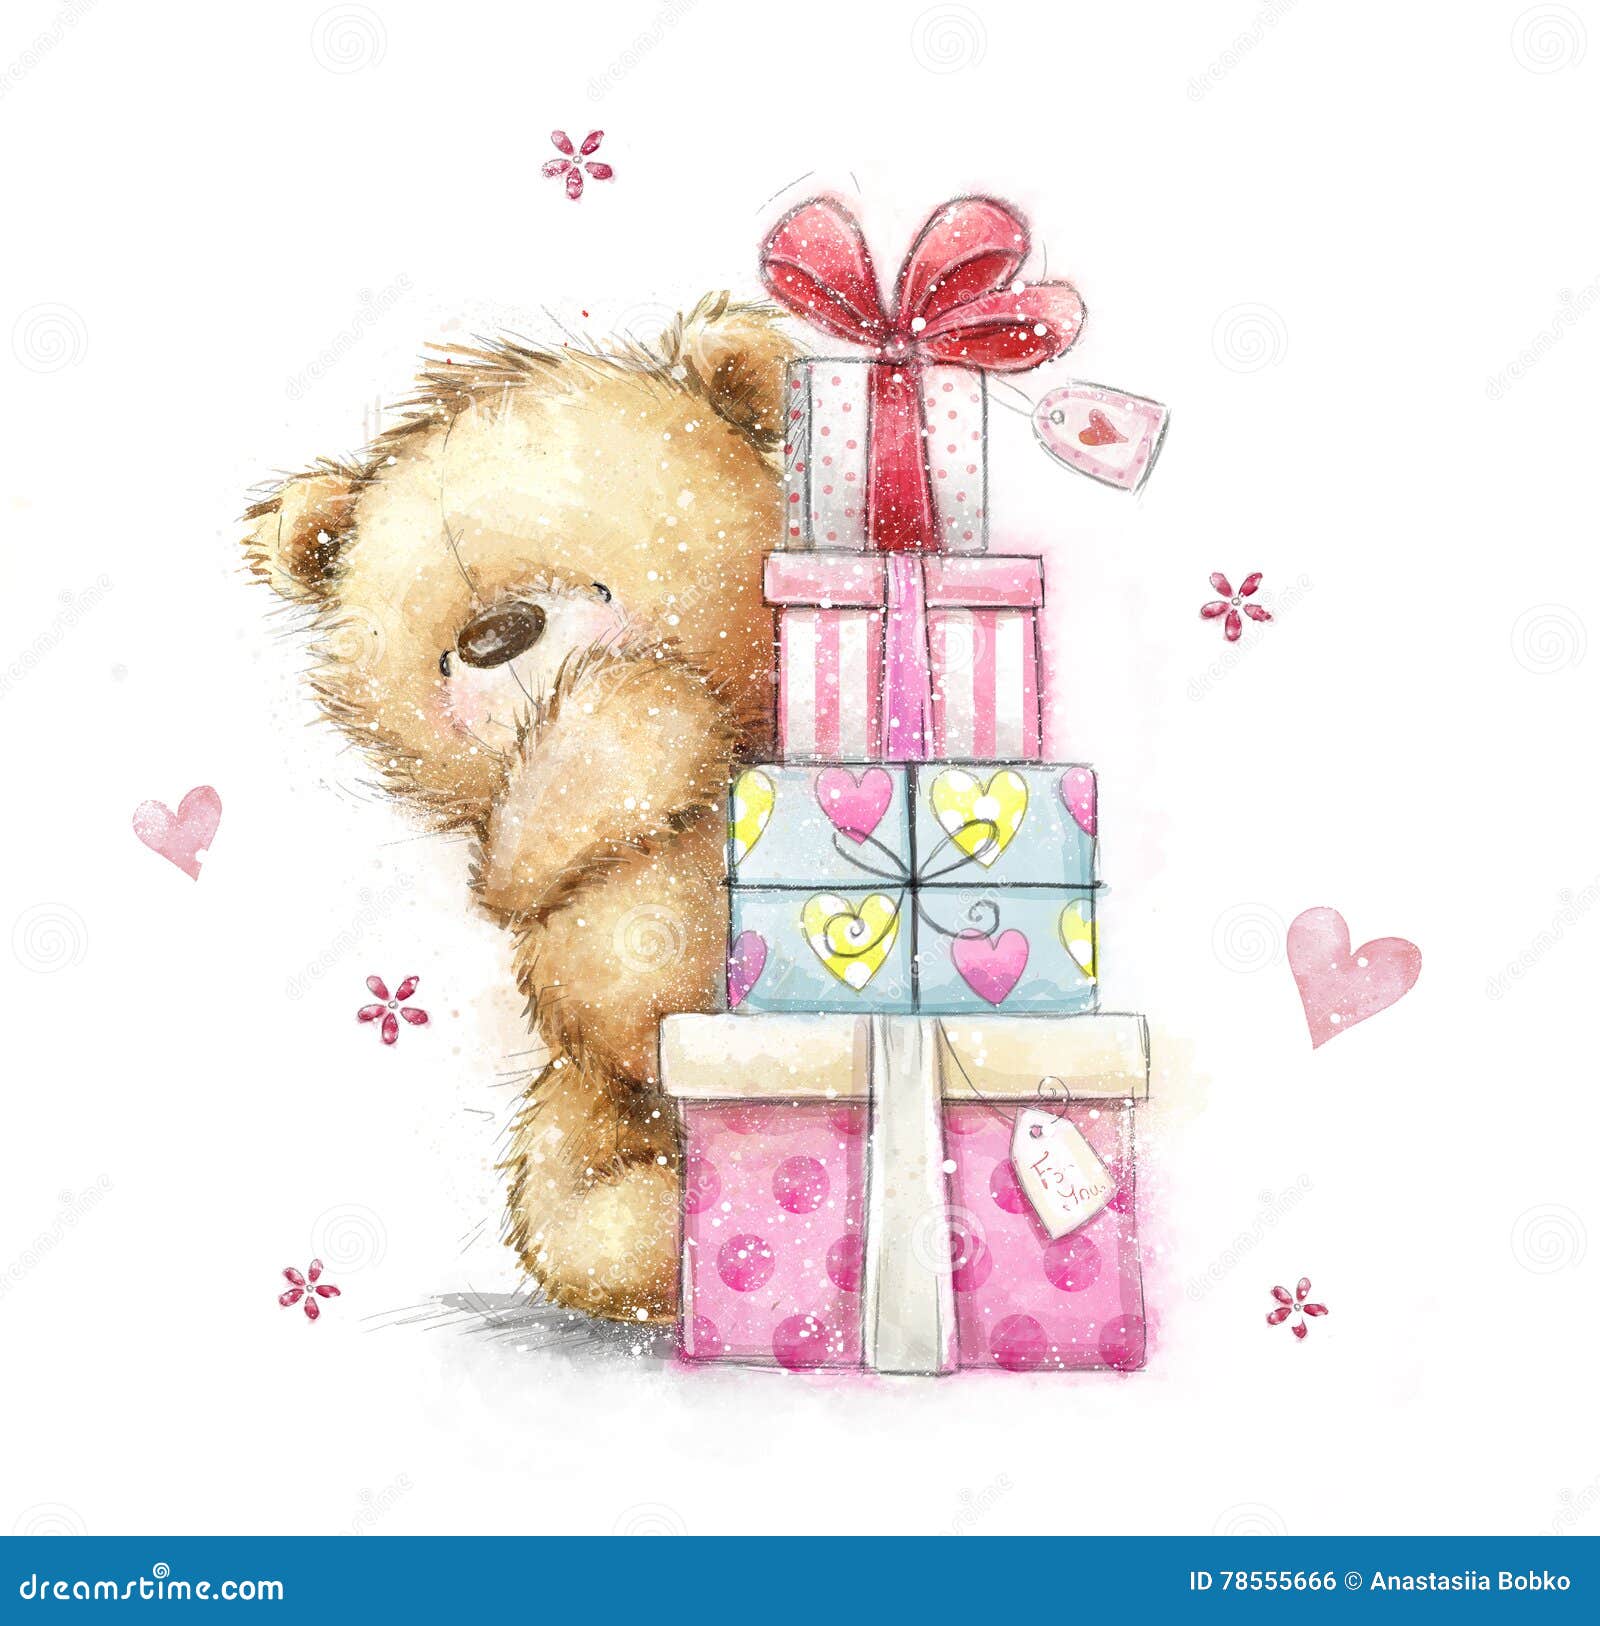 teddy bear with the gifts.